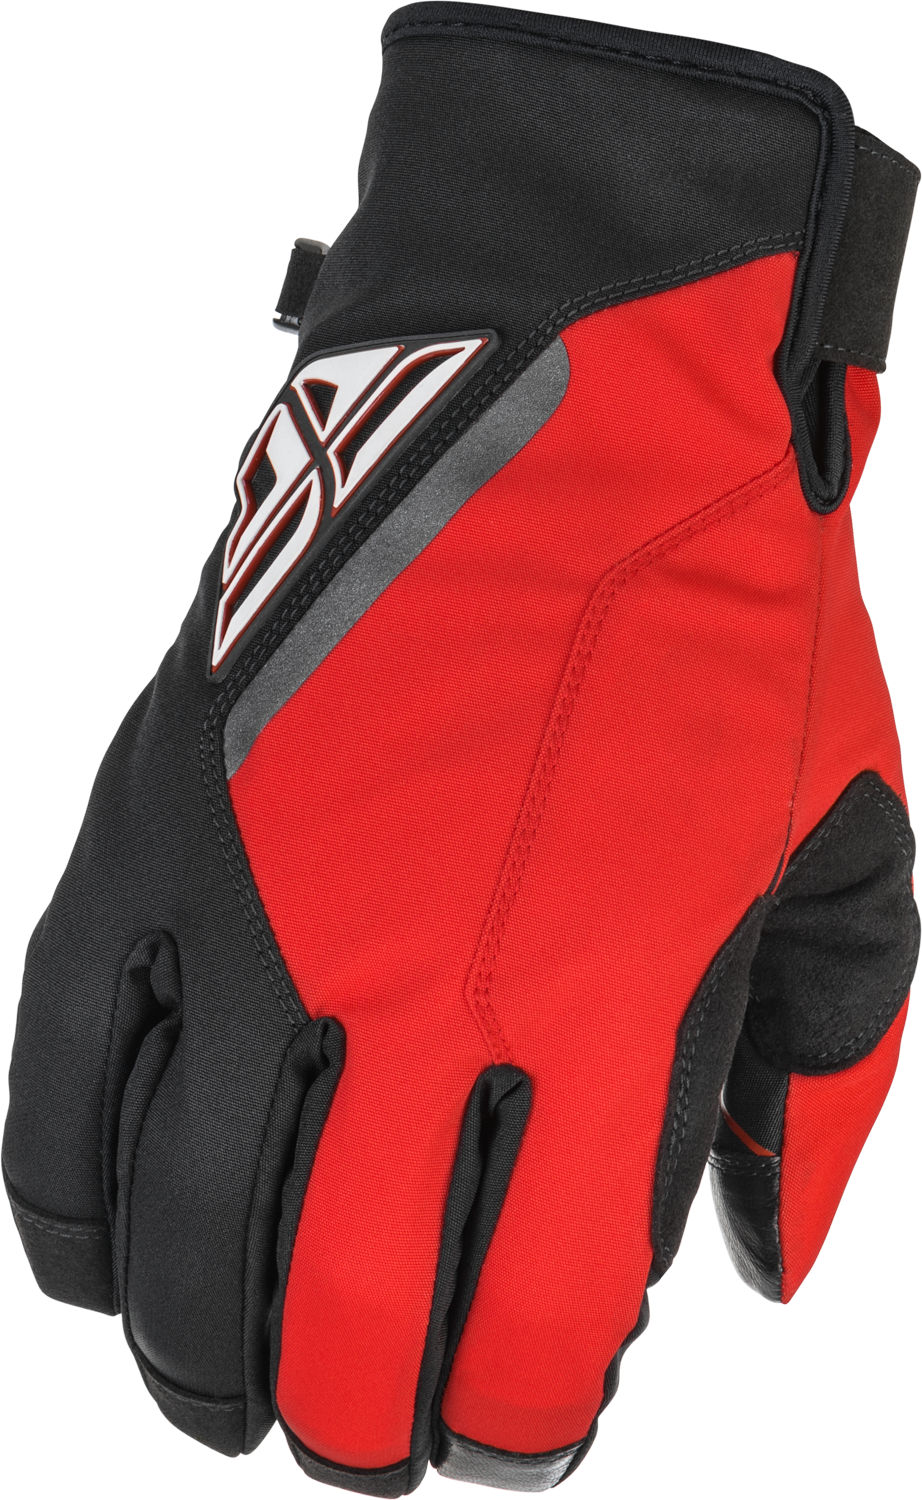 FLY RACING Title Gloves Black/Red Sz 10 371-05310